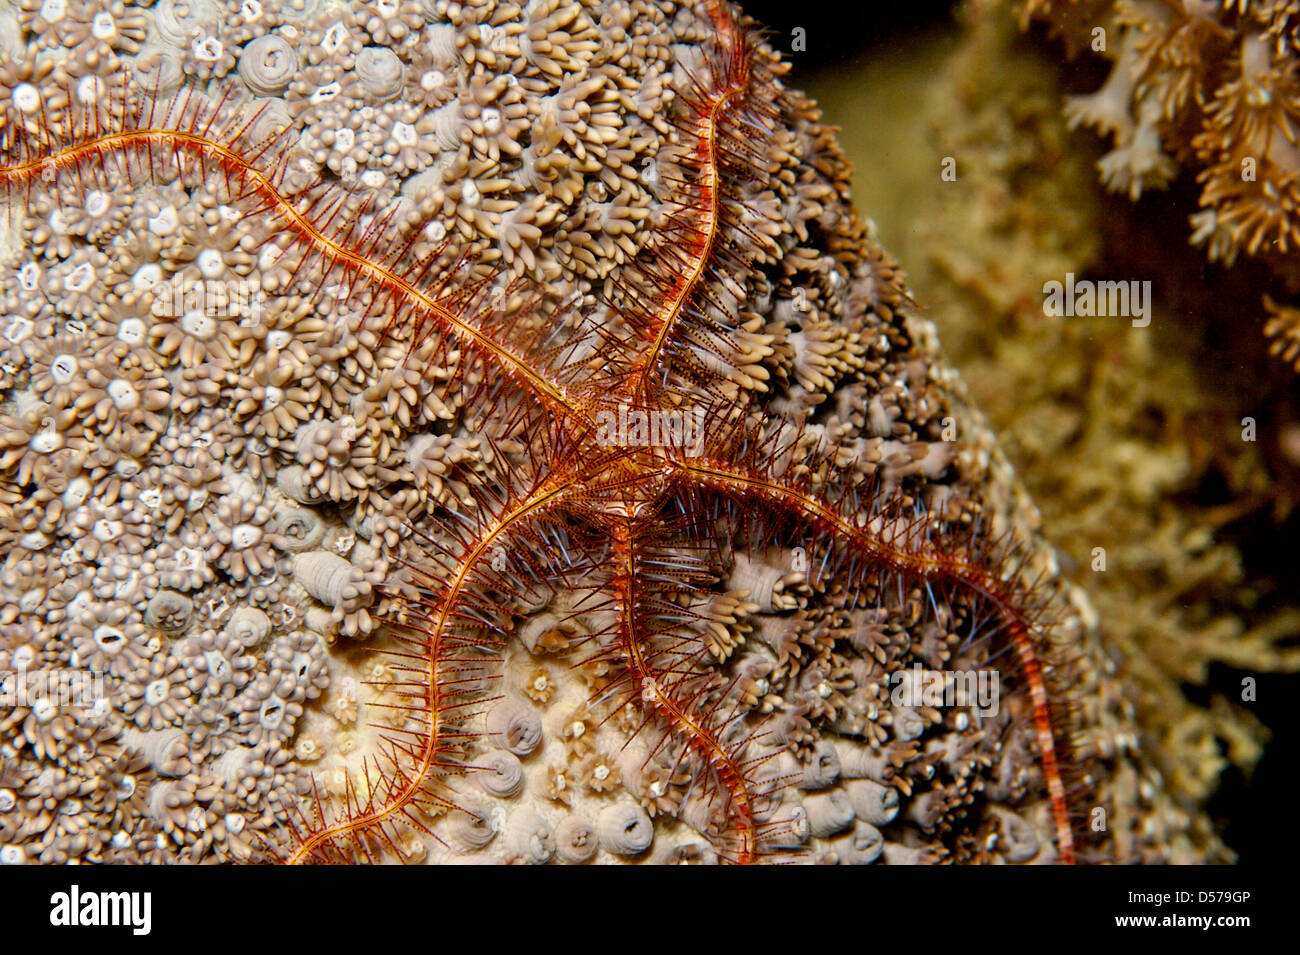 Soft coral brittle star on hard coral Stock Photo